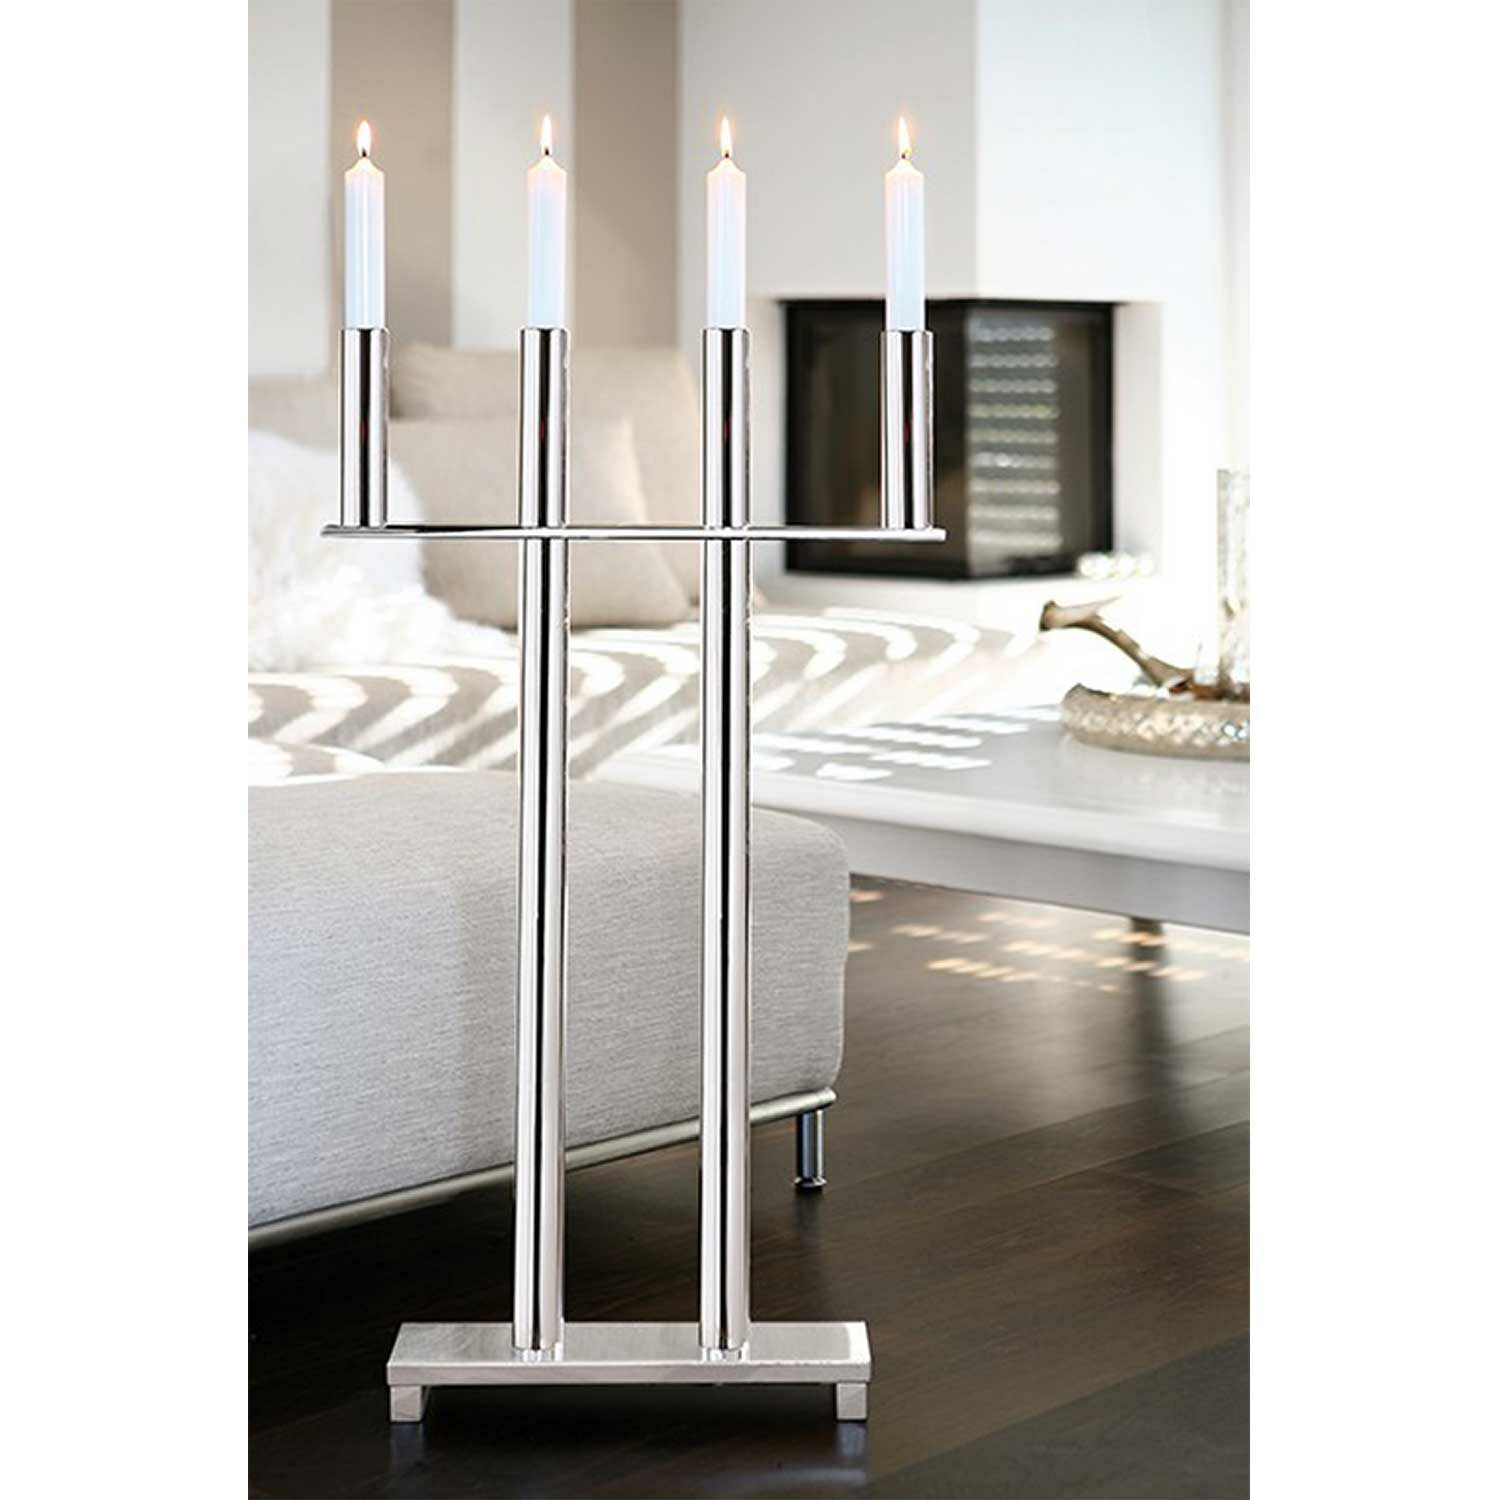 MEMPHIS floor candlestick with 4 flames